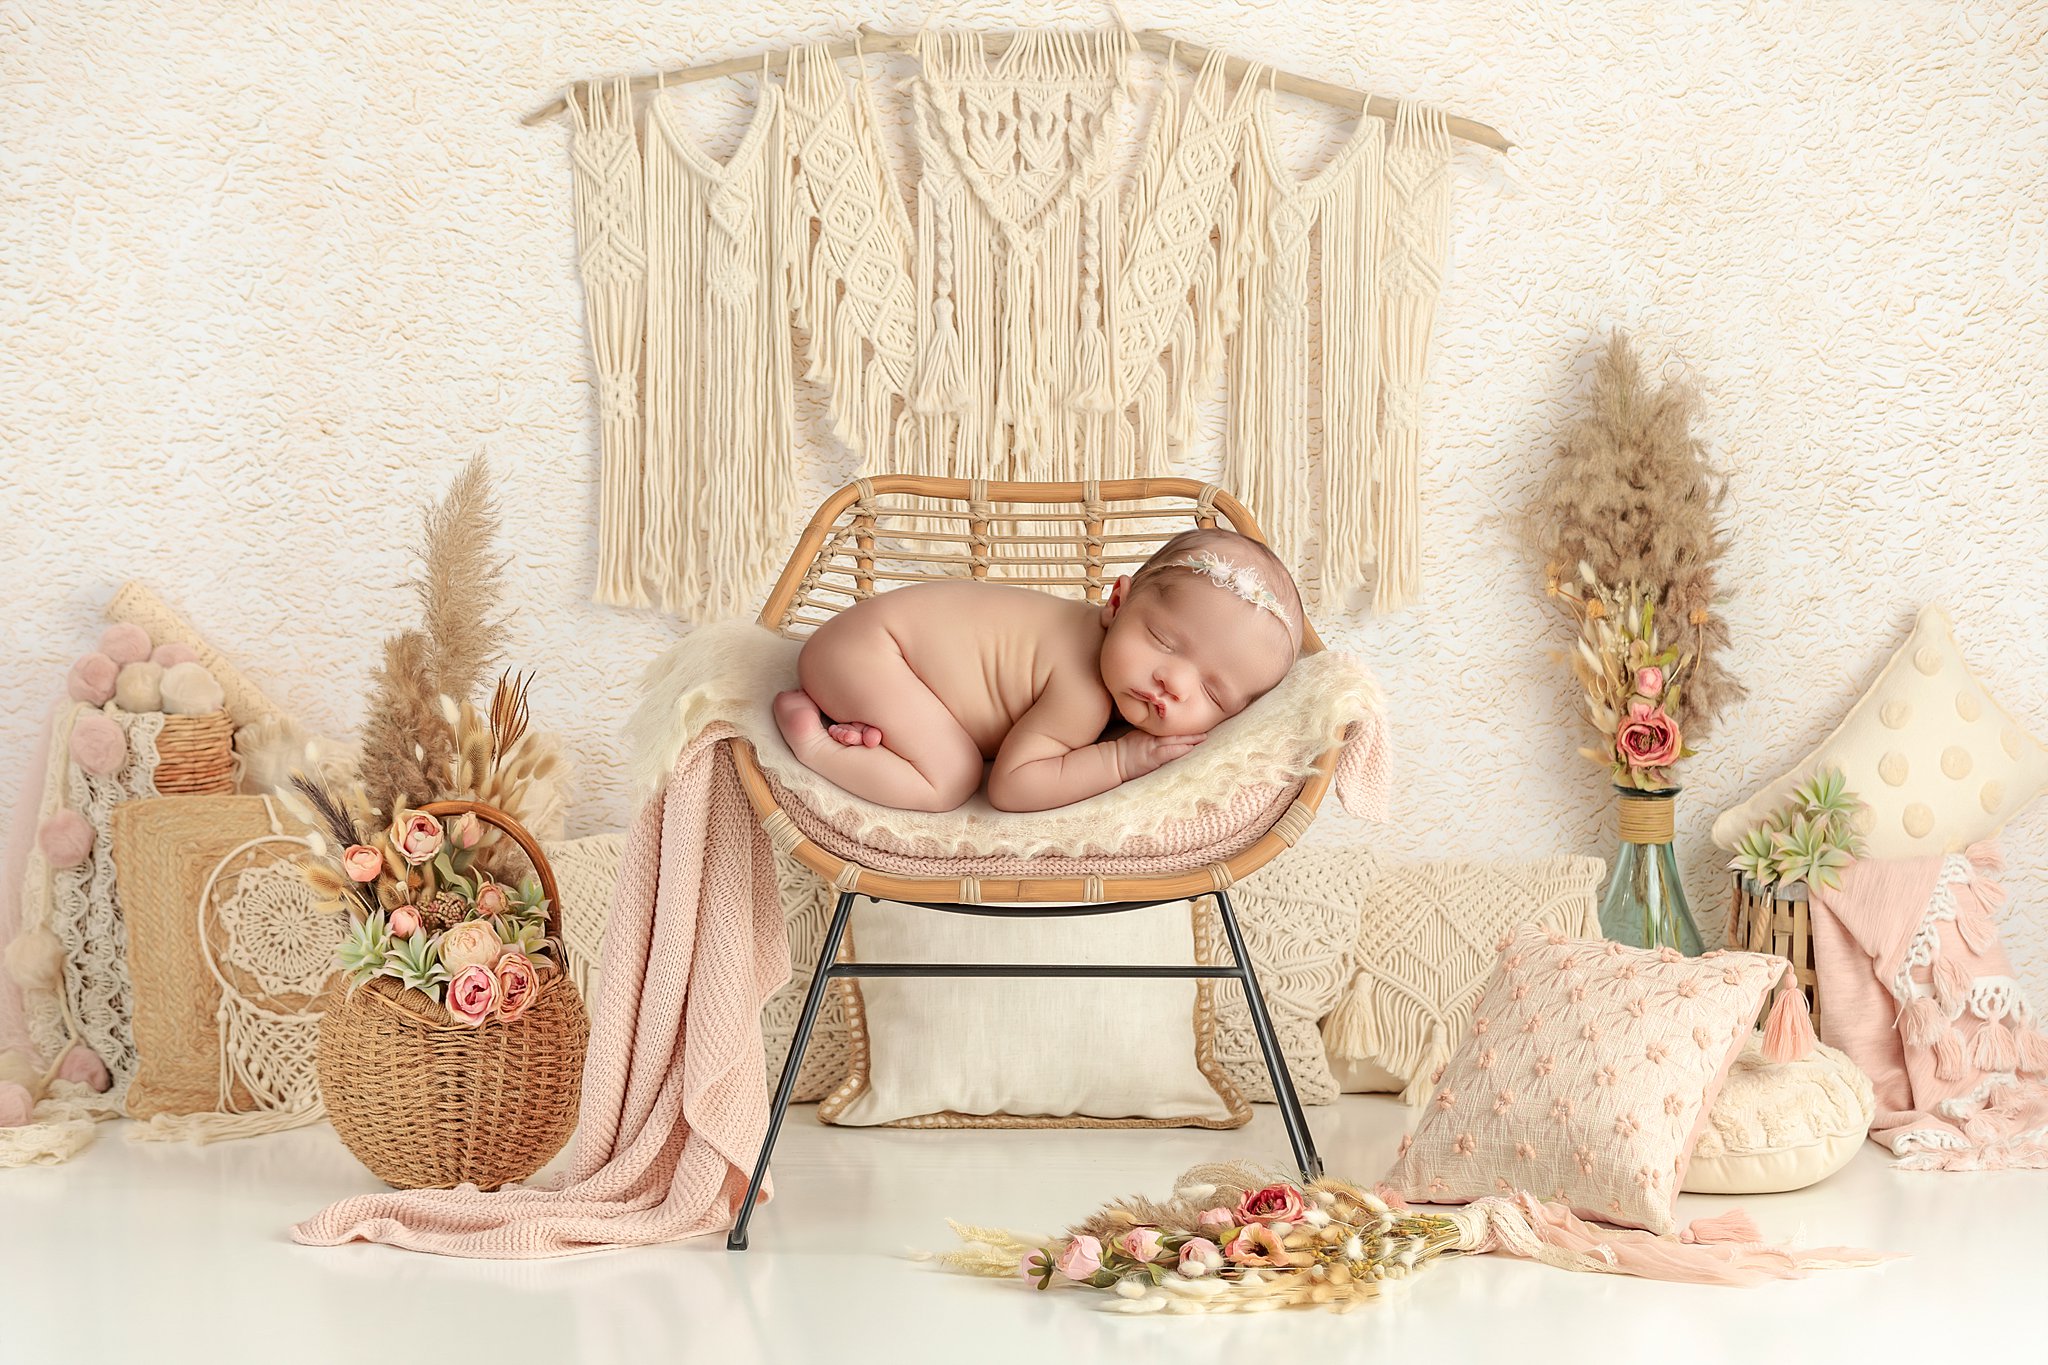 A newborn baby sleeps on a padded wicker chair surrounded by flowers and pillows in a studio ellifox